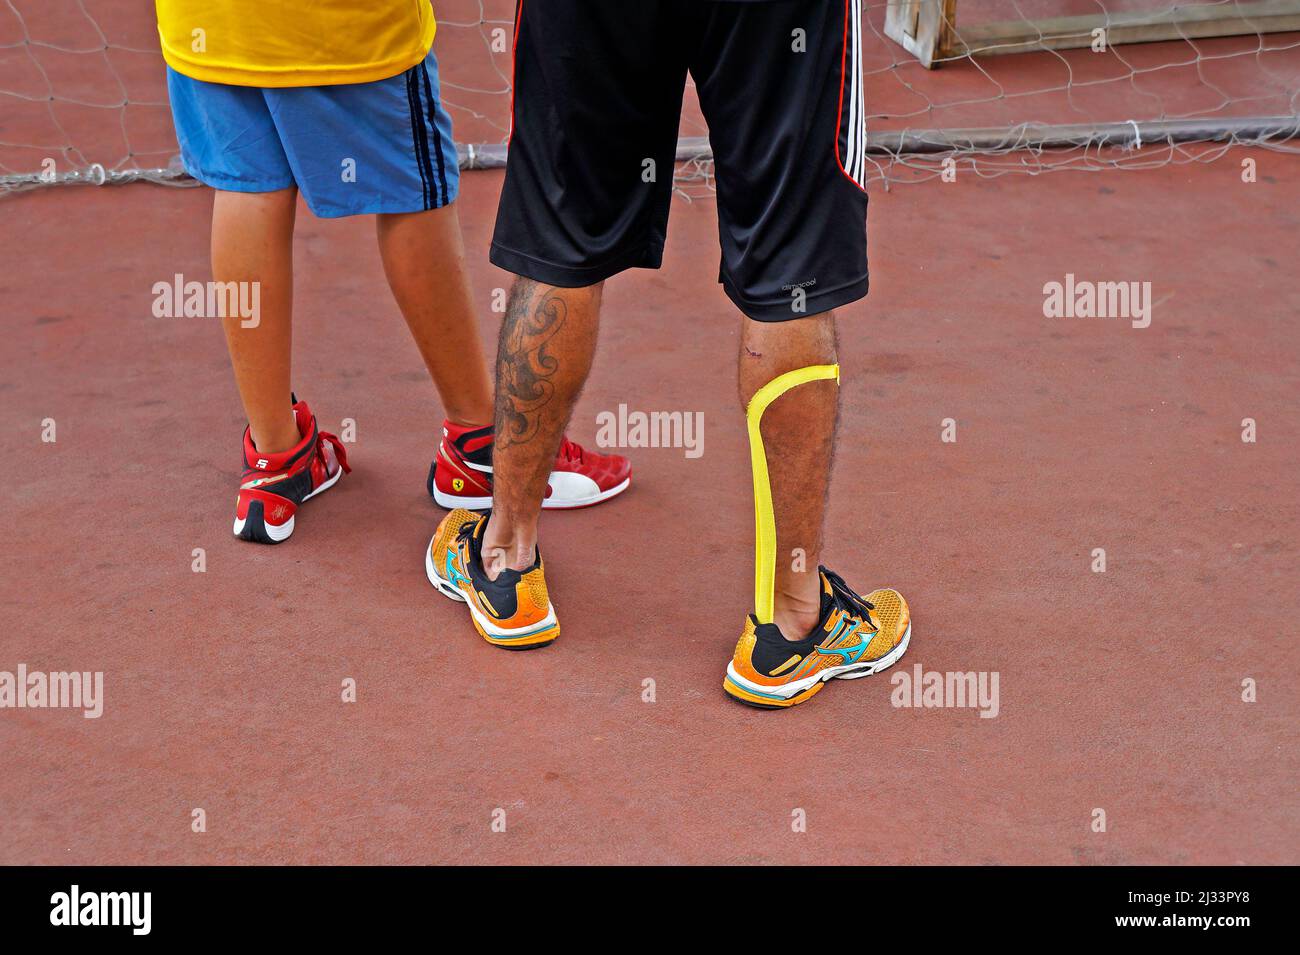 SANTO ANDRE, SAO PAULO, BRAZIL - MARCH 11, 2017: Father and son legs on a sports court Stock Photo